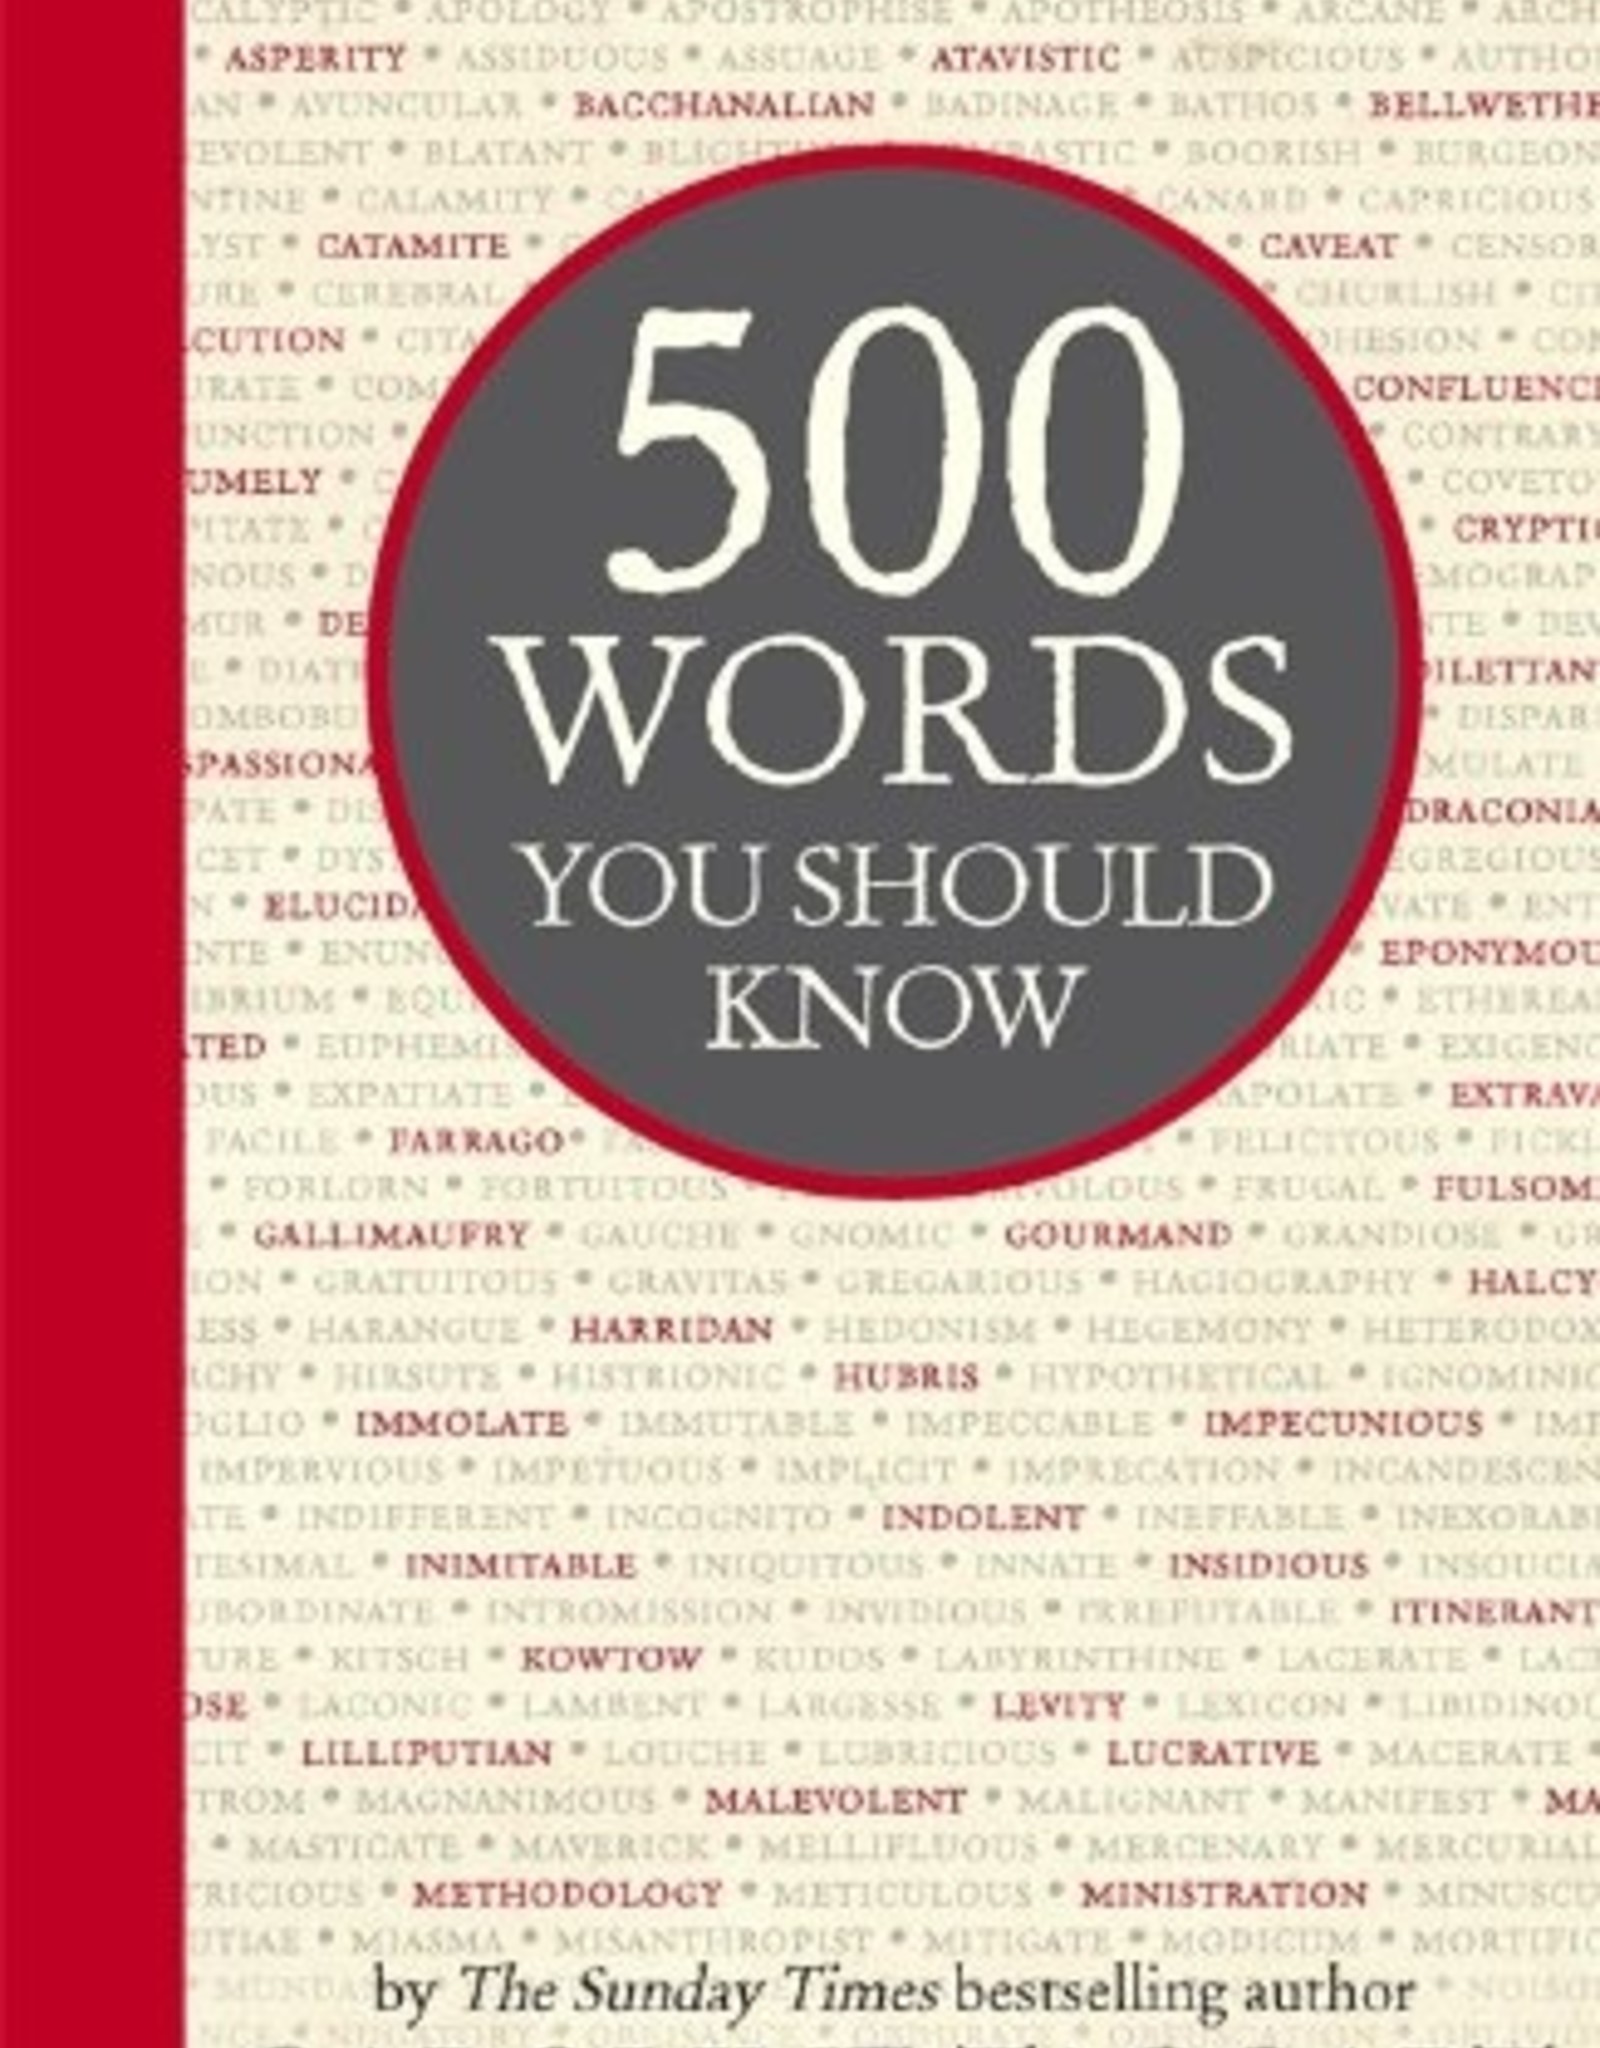 500 WORDS YOU SHOULD KNOW